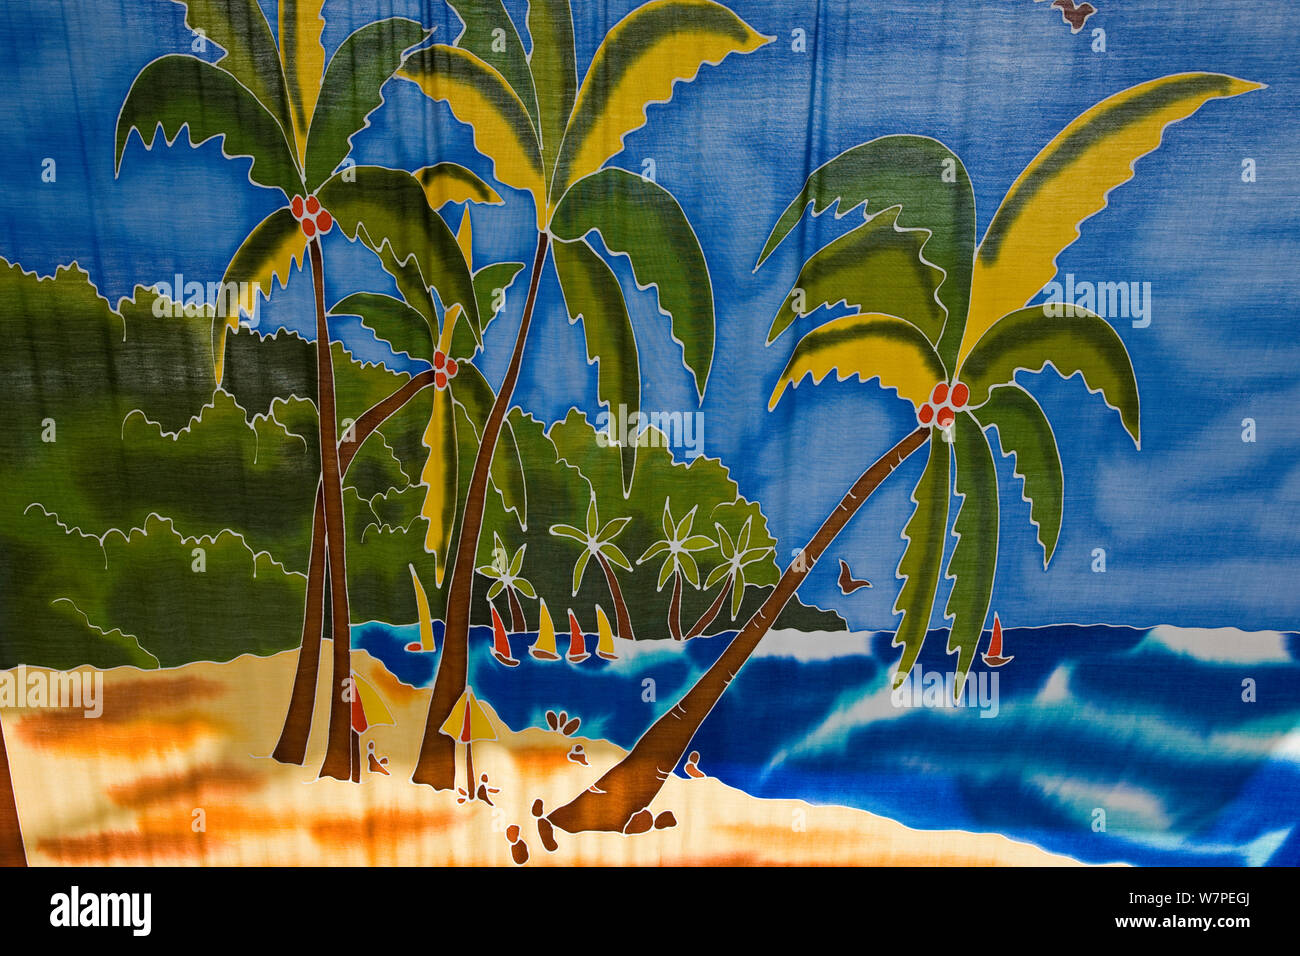 Scena tropicale pittura in francese Marigot, St Martin, Antille Olandesi, Isole Sottovento, Piccole Antille, Caraibi, West Indies 2008 Foto Stock